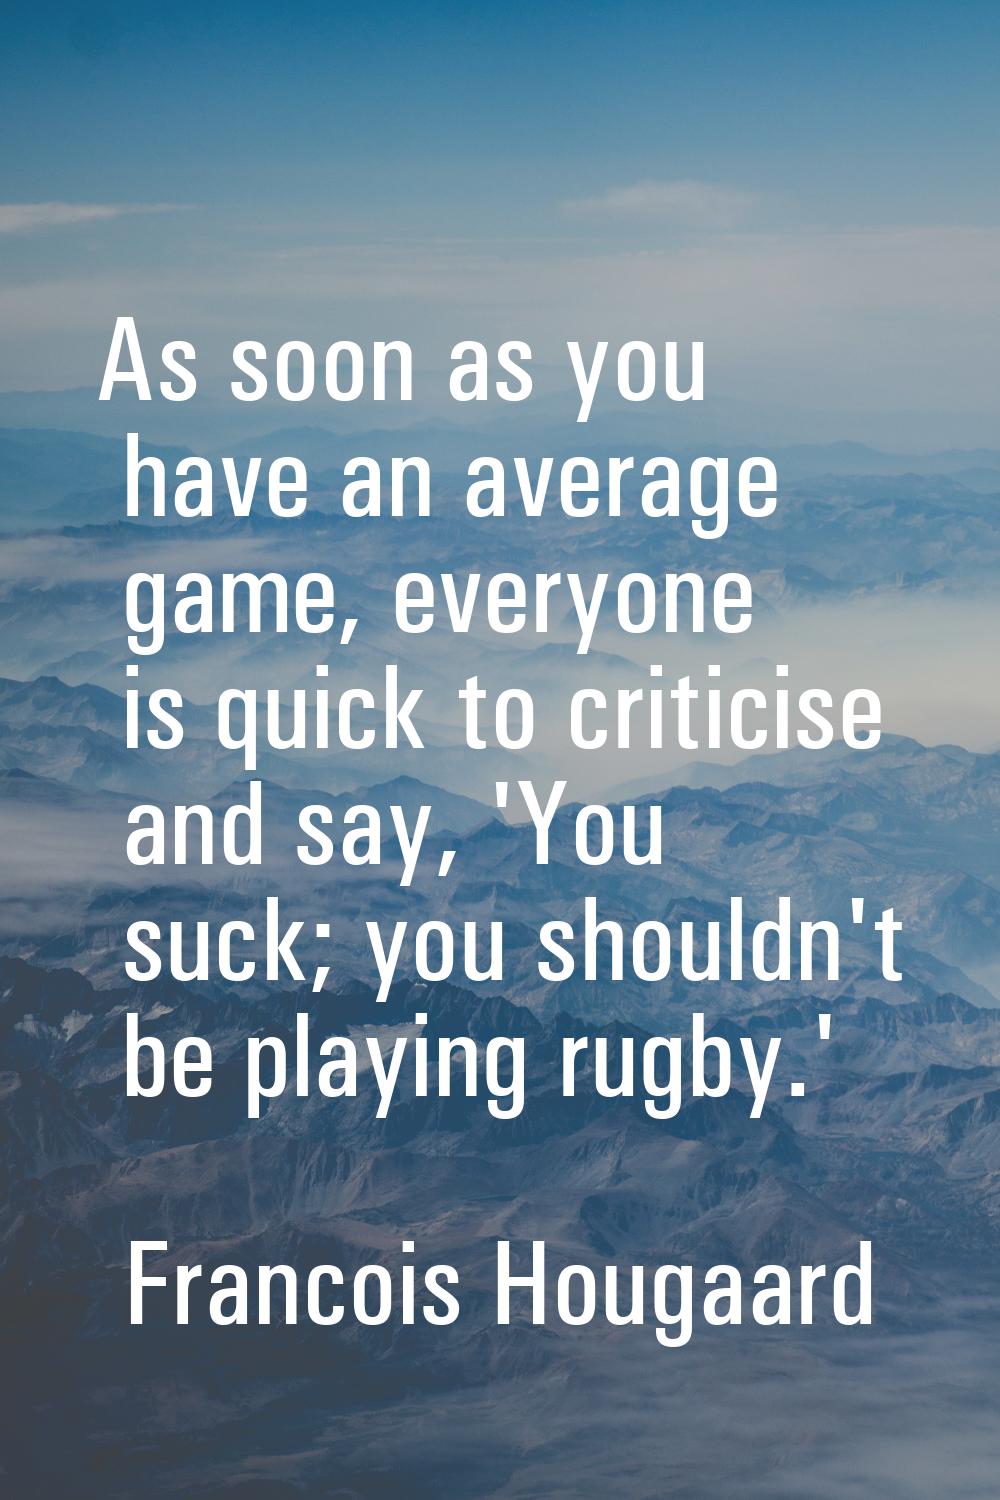 As soon as you have an average game, everyone is quick to criticise and say, 'You suck; you shouldn